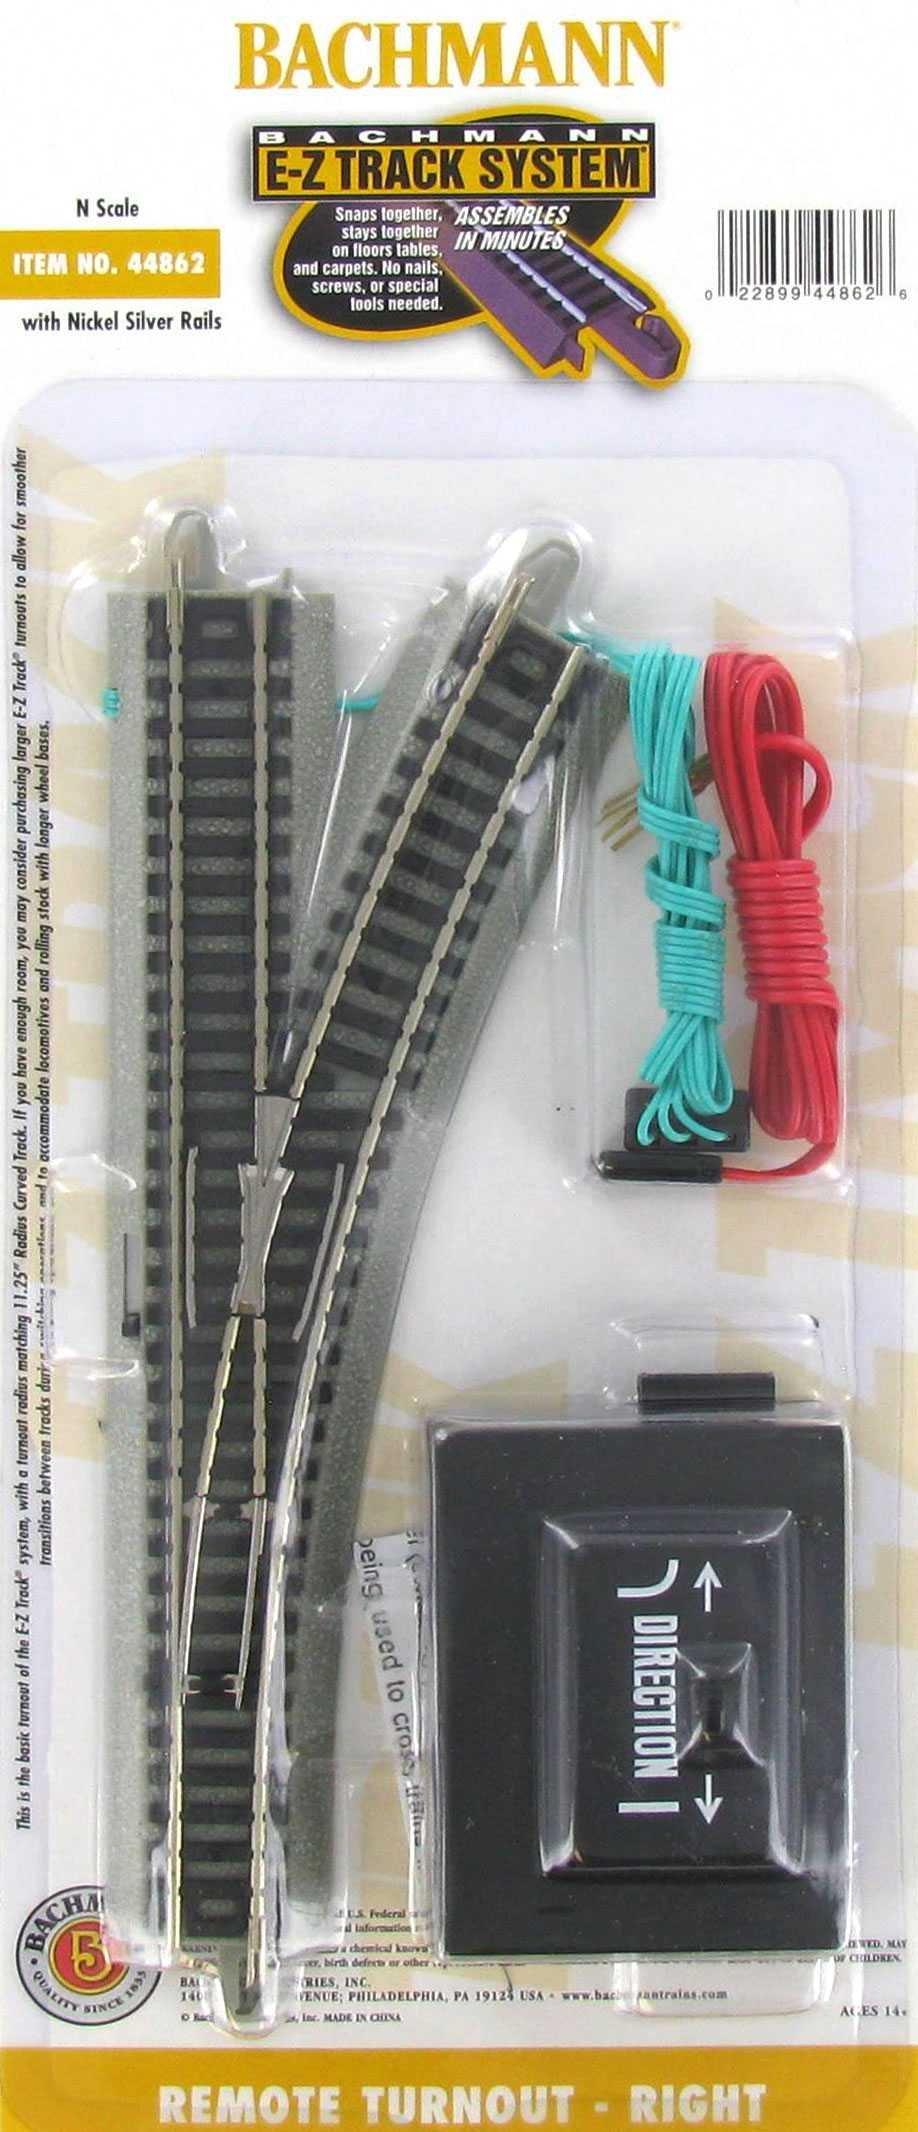 N Scale Right Remote Turnout E-Z Track System, Hobby Lobby